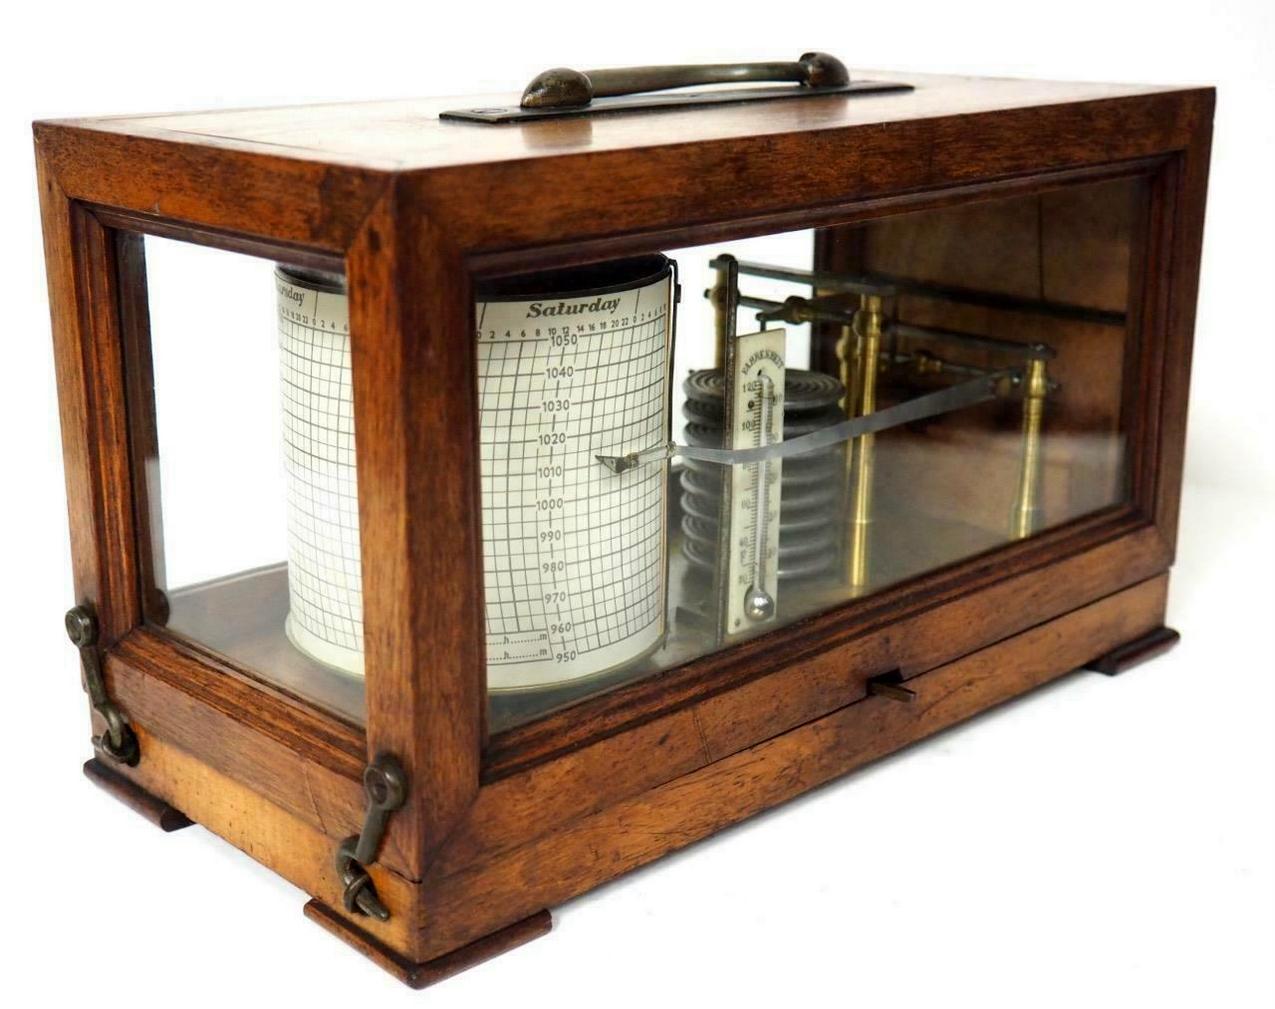 Superb well grained polished oak hinged lid glazed cased English Barograph scientific weather machine of exceptional quality, of traditional rectangular form. Last quarter of the Nineteenth Century, could be a little later. 

The original glazed